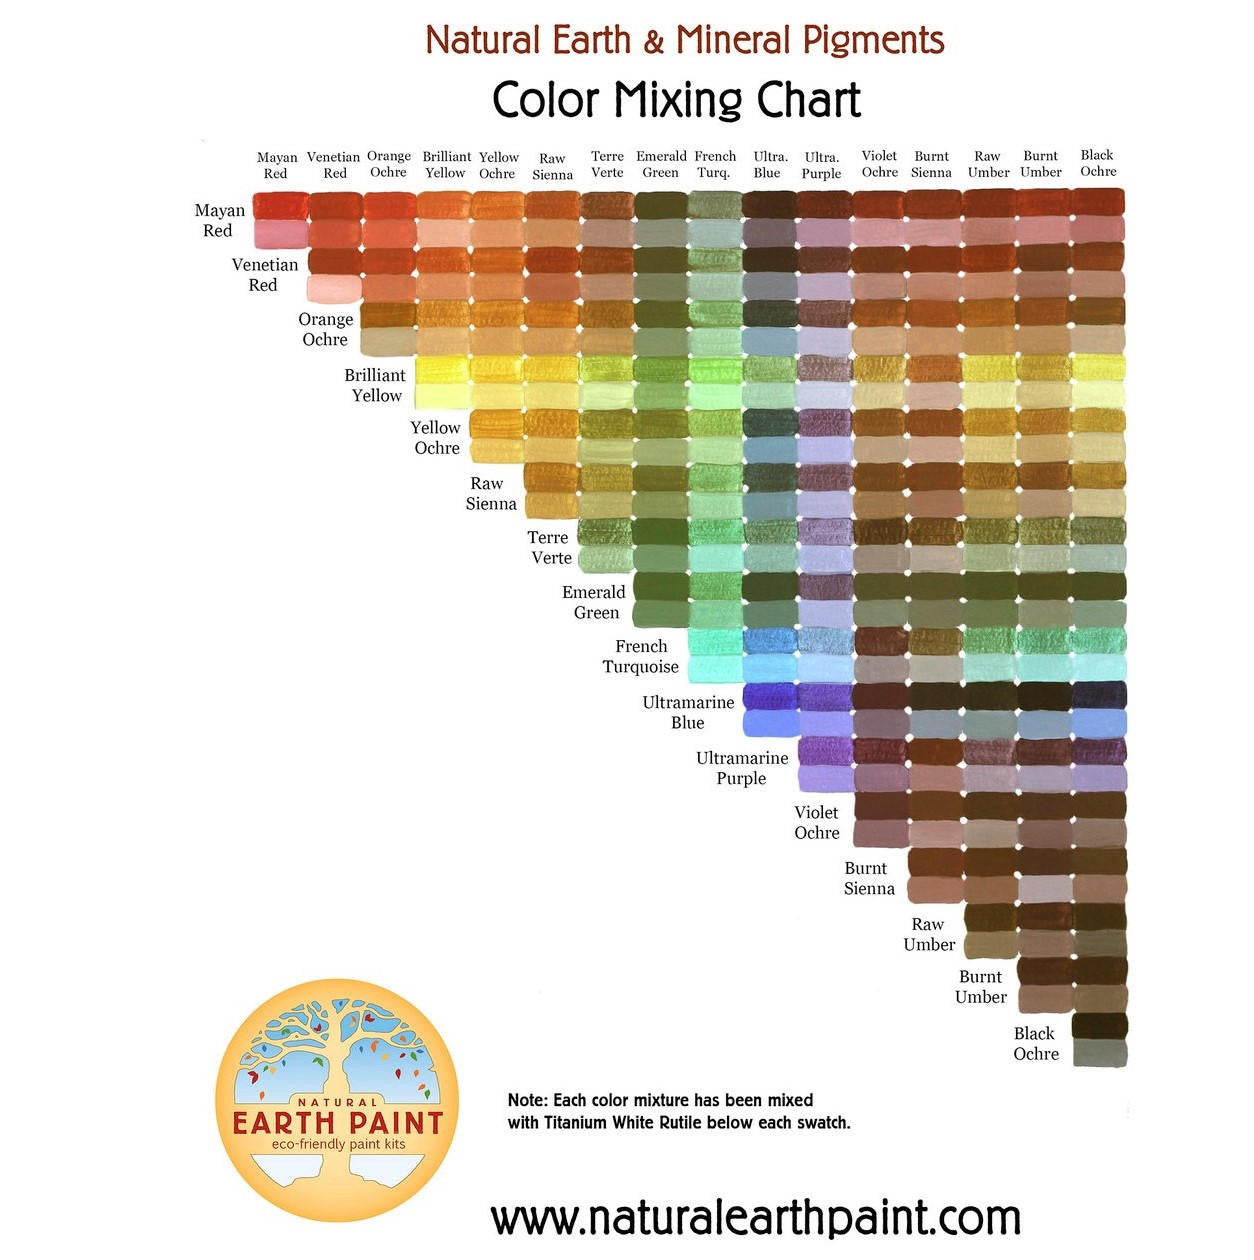 Natural Earth Paint Color Mixing Chart 